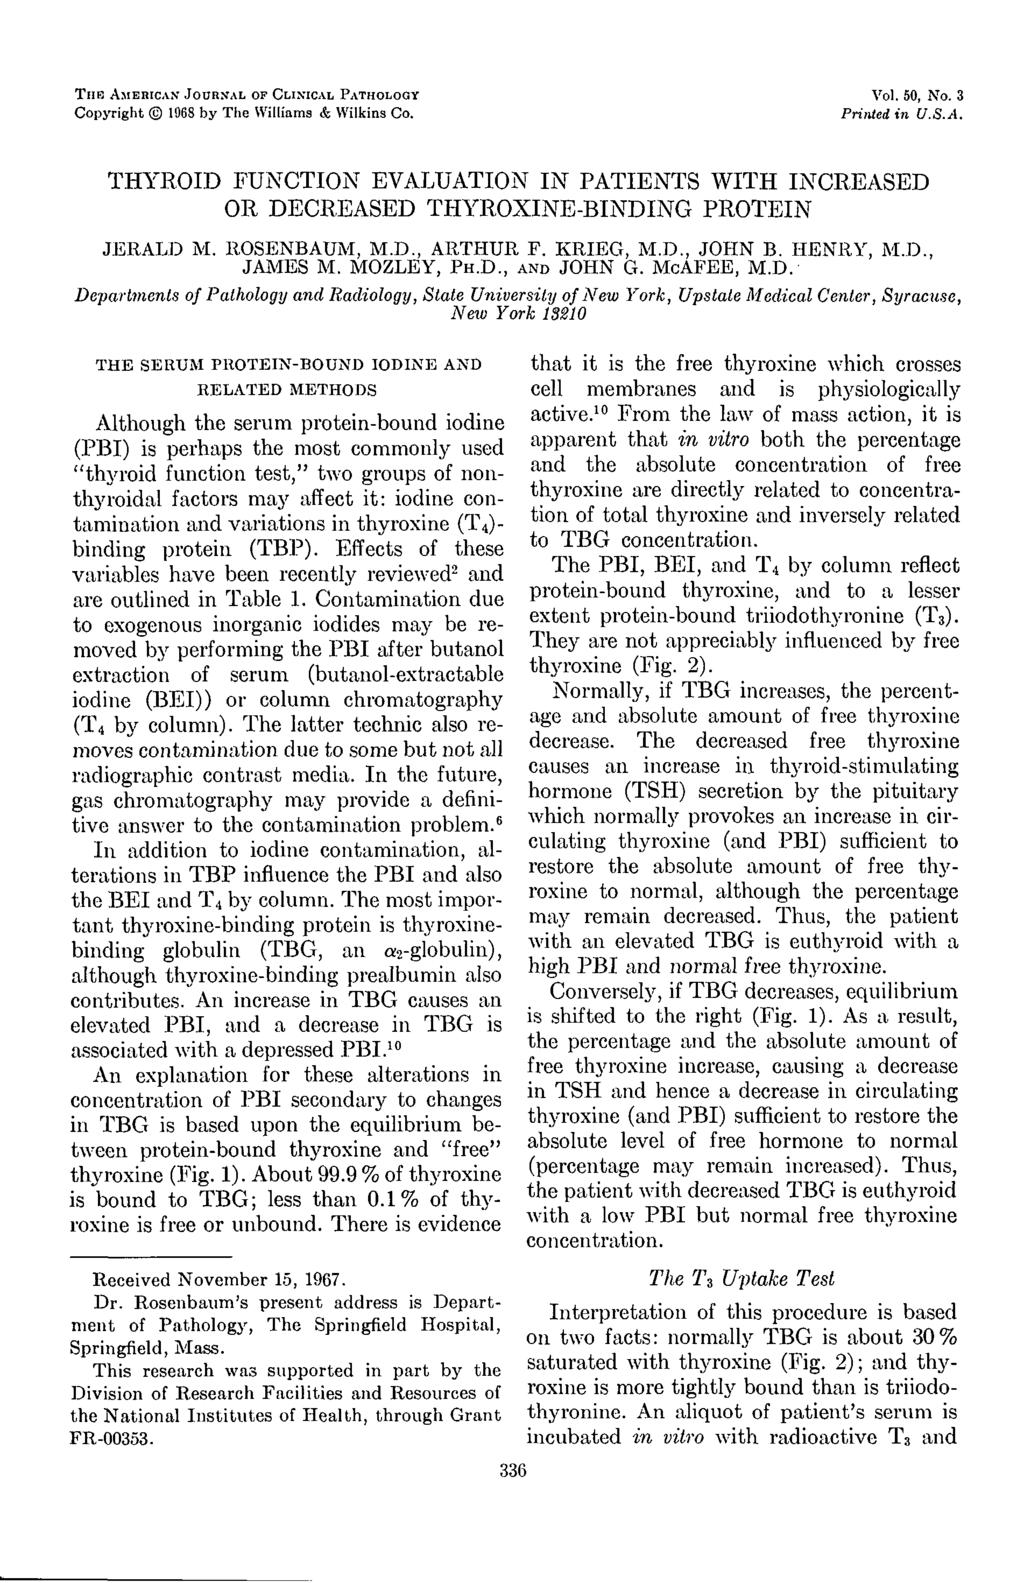 THE AMEBICAN JOURNAL OF CLINICAL PATHOLOGY Vol. 50, No. 3 Copyright 1968 by The Williams & Wilkins Co. Printed in U.S.A. THYROID FUNCTION EVALUATION IN PATIENTS WITH INCREASED OR DECREASED THYROXINE-BINDING PROTEIN JERALD M.